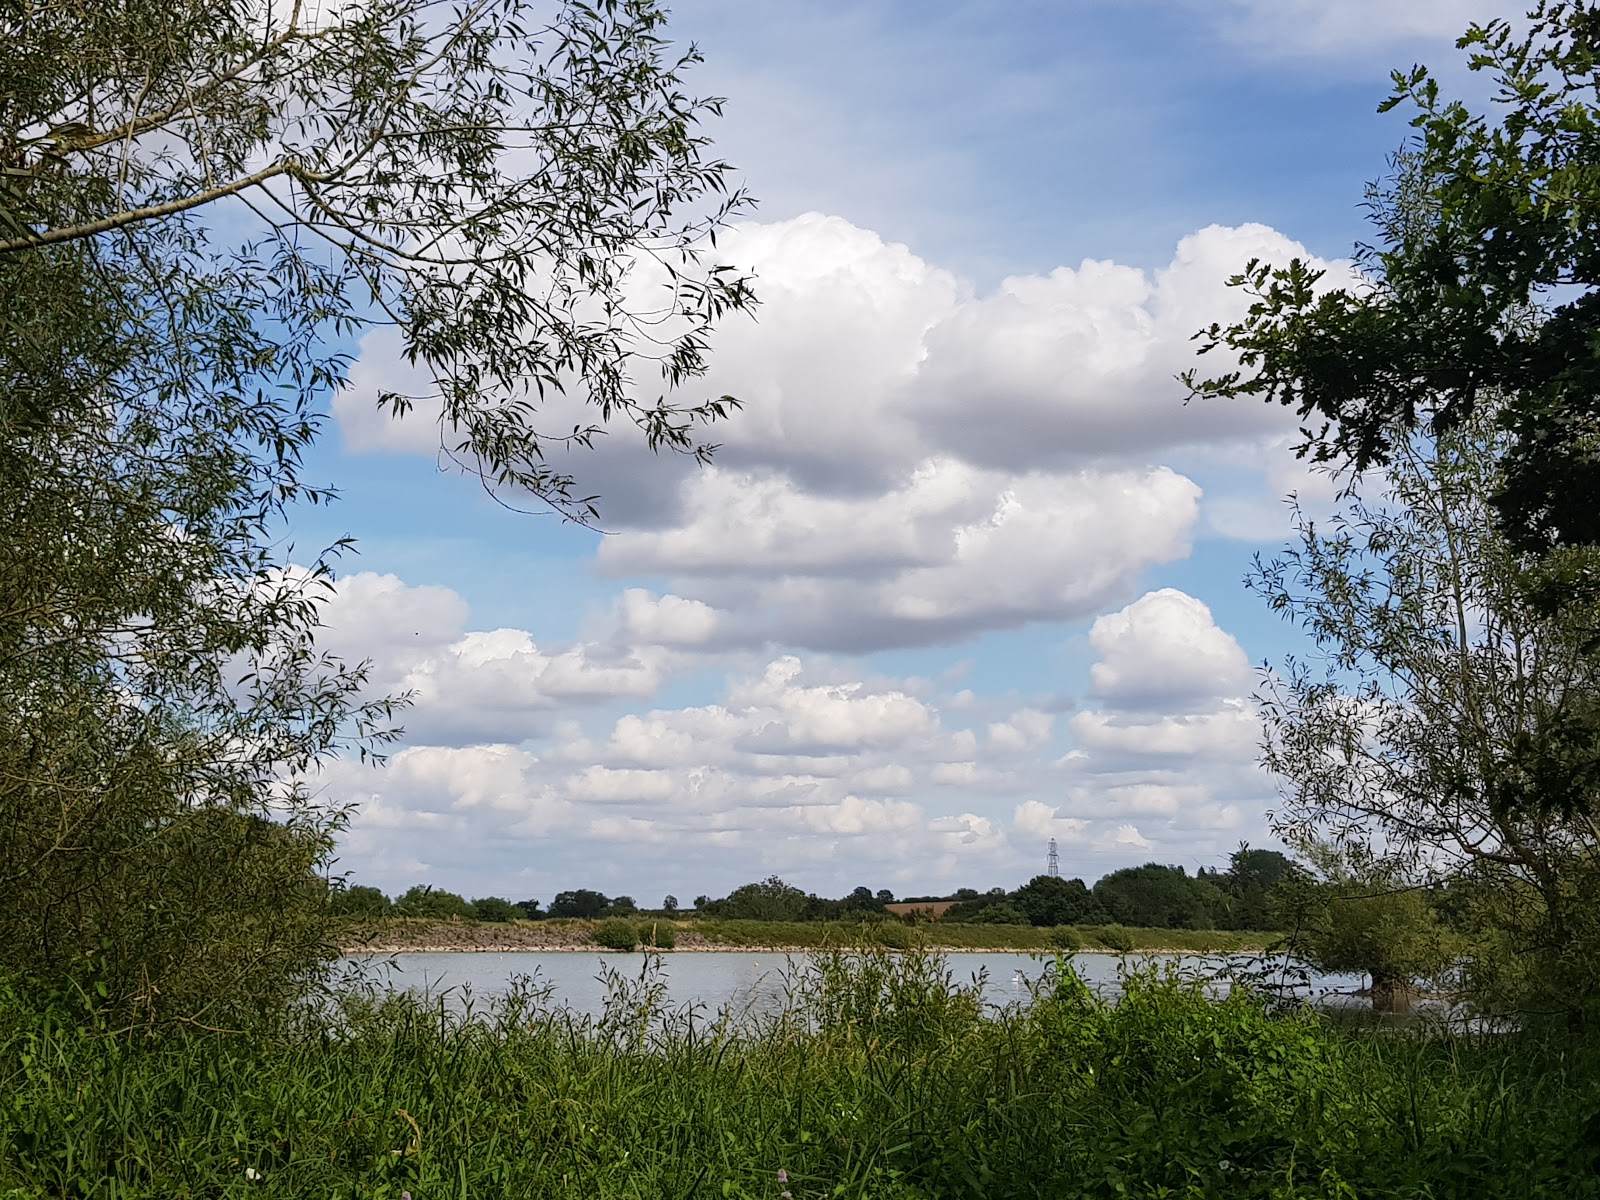 https://whatremovals.co.uk/wp-content/uploads/2022/02/Daventry Country Park-300x168.jpeg